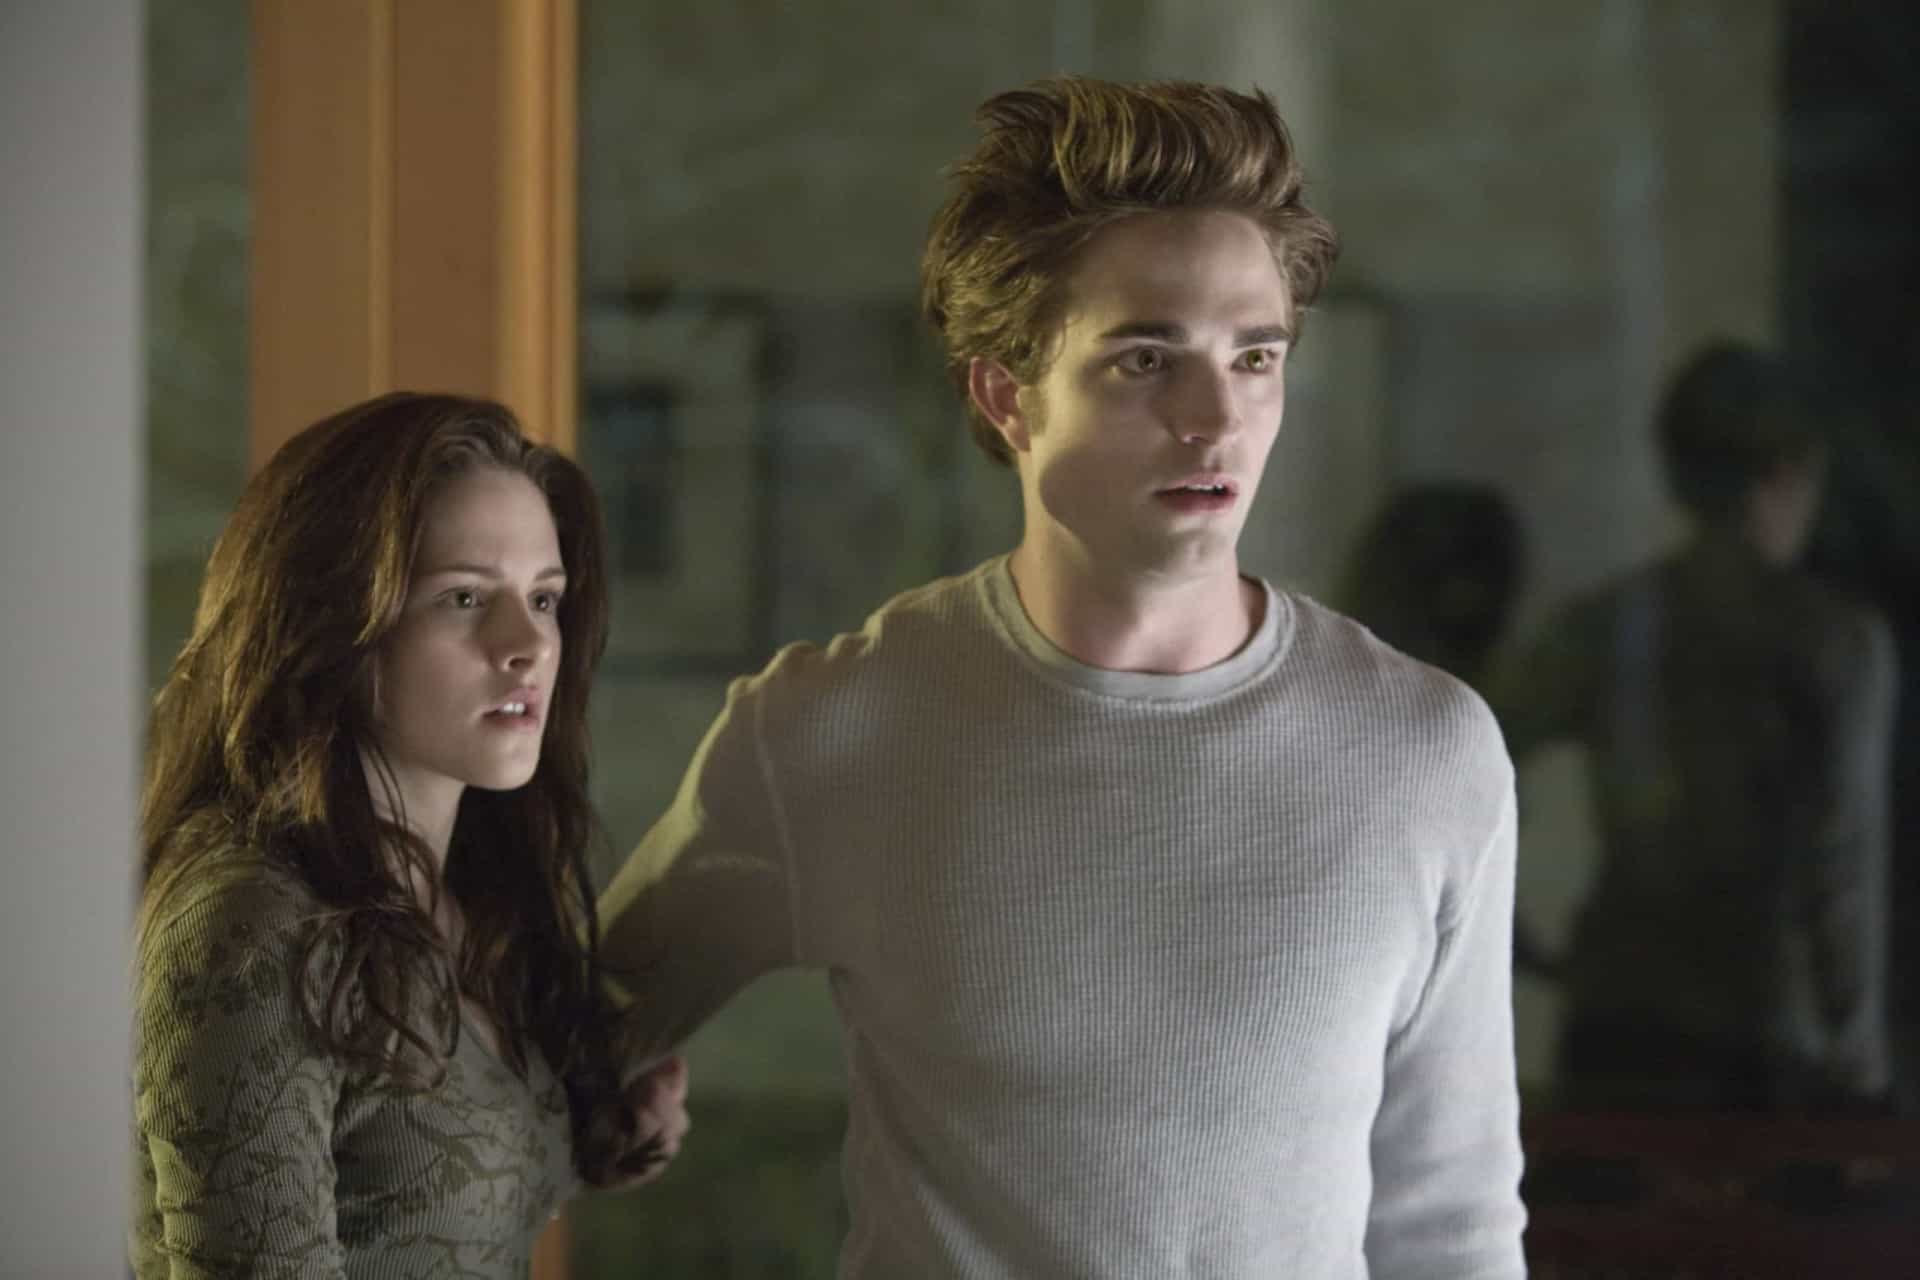 <p>And then in 2008 we had a human (Kristen Stewart) falling in love with a vampire (Robert Pattinson), and the rest is history.</p><p>You may also like:<a href="https://www.starsinsider.com/n/163177?utm_source=msn.com&utm_medium=display&utm_campaign=referral_description&utm_content=519875en-us"> Oymyakon: the coldest inhabited place on Earth</a></p>